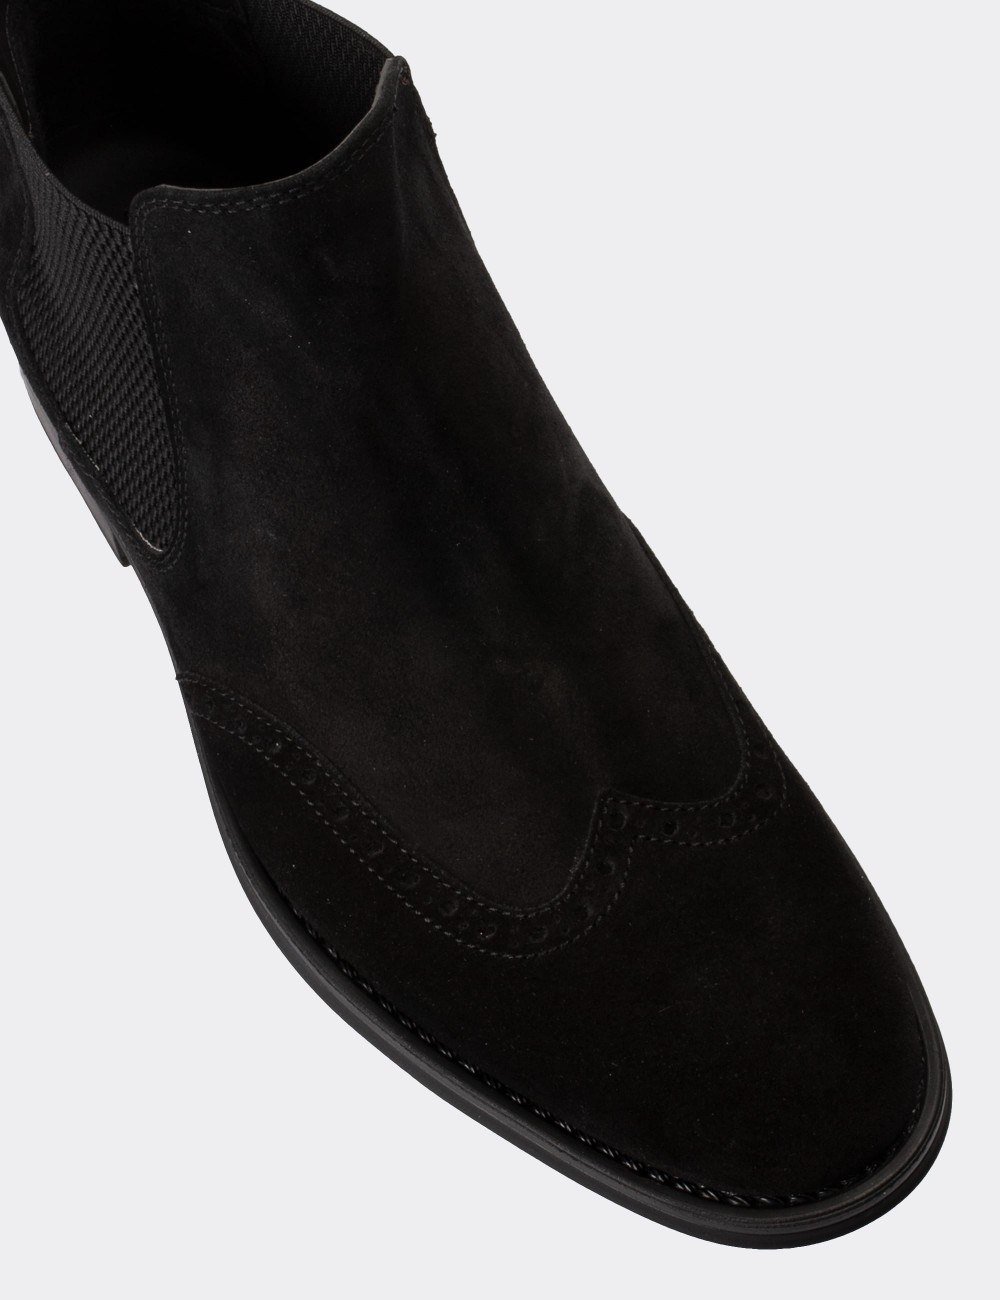 Black Suede Leather Chelsea Boots - 01622MSYHC04